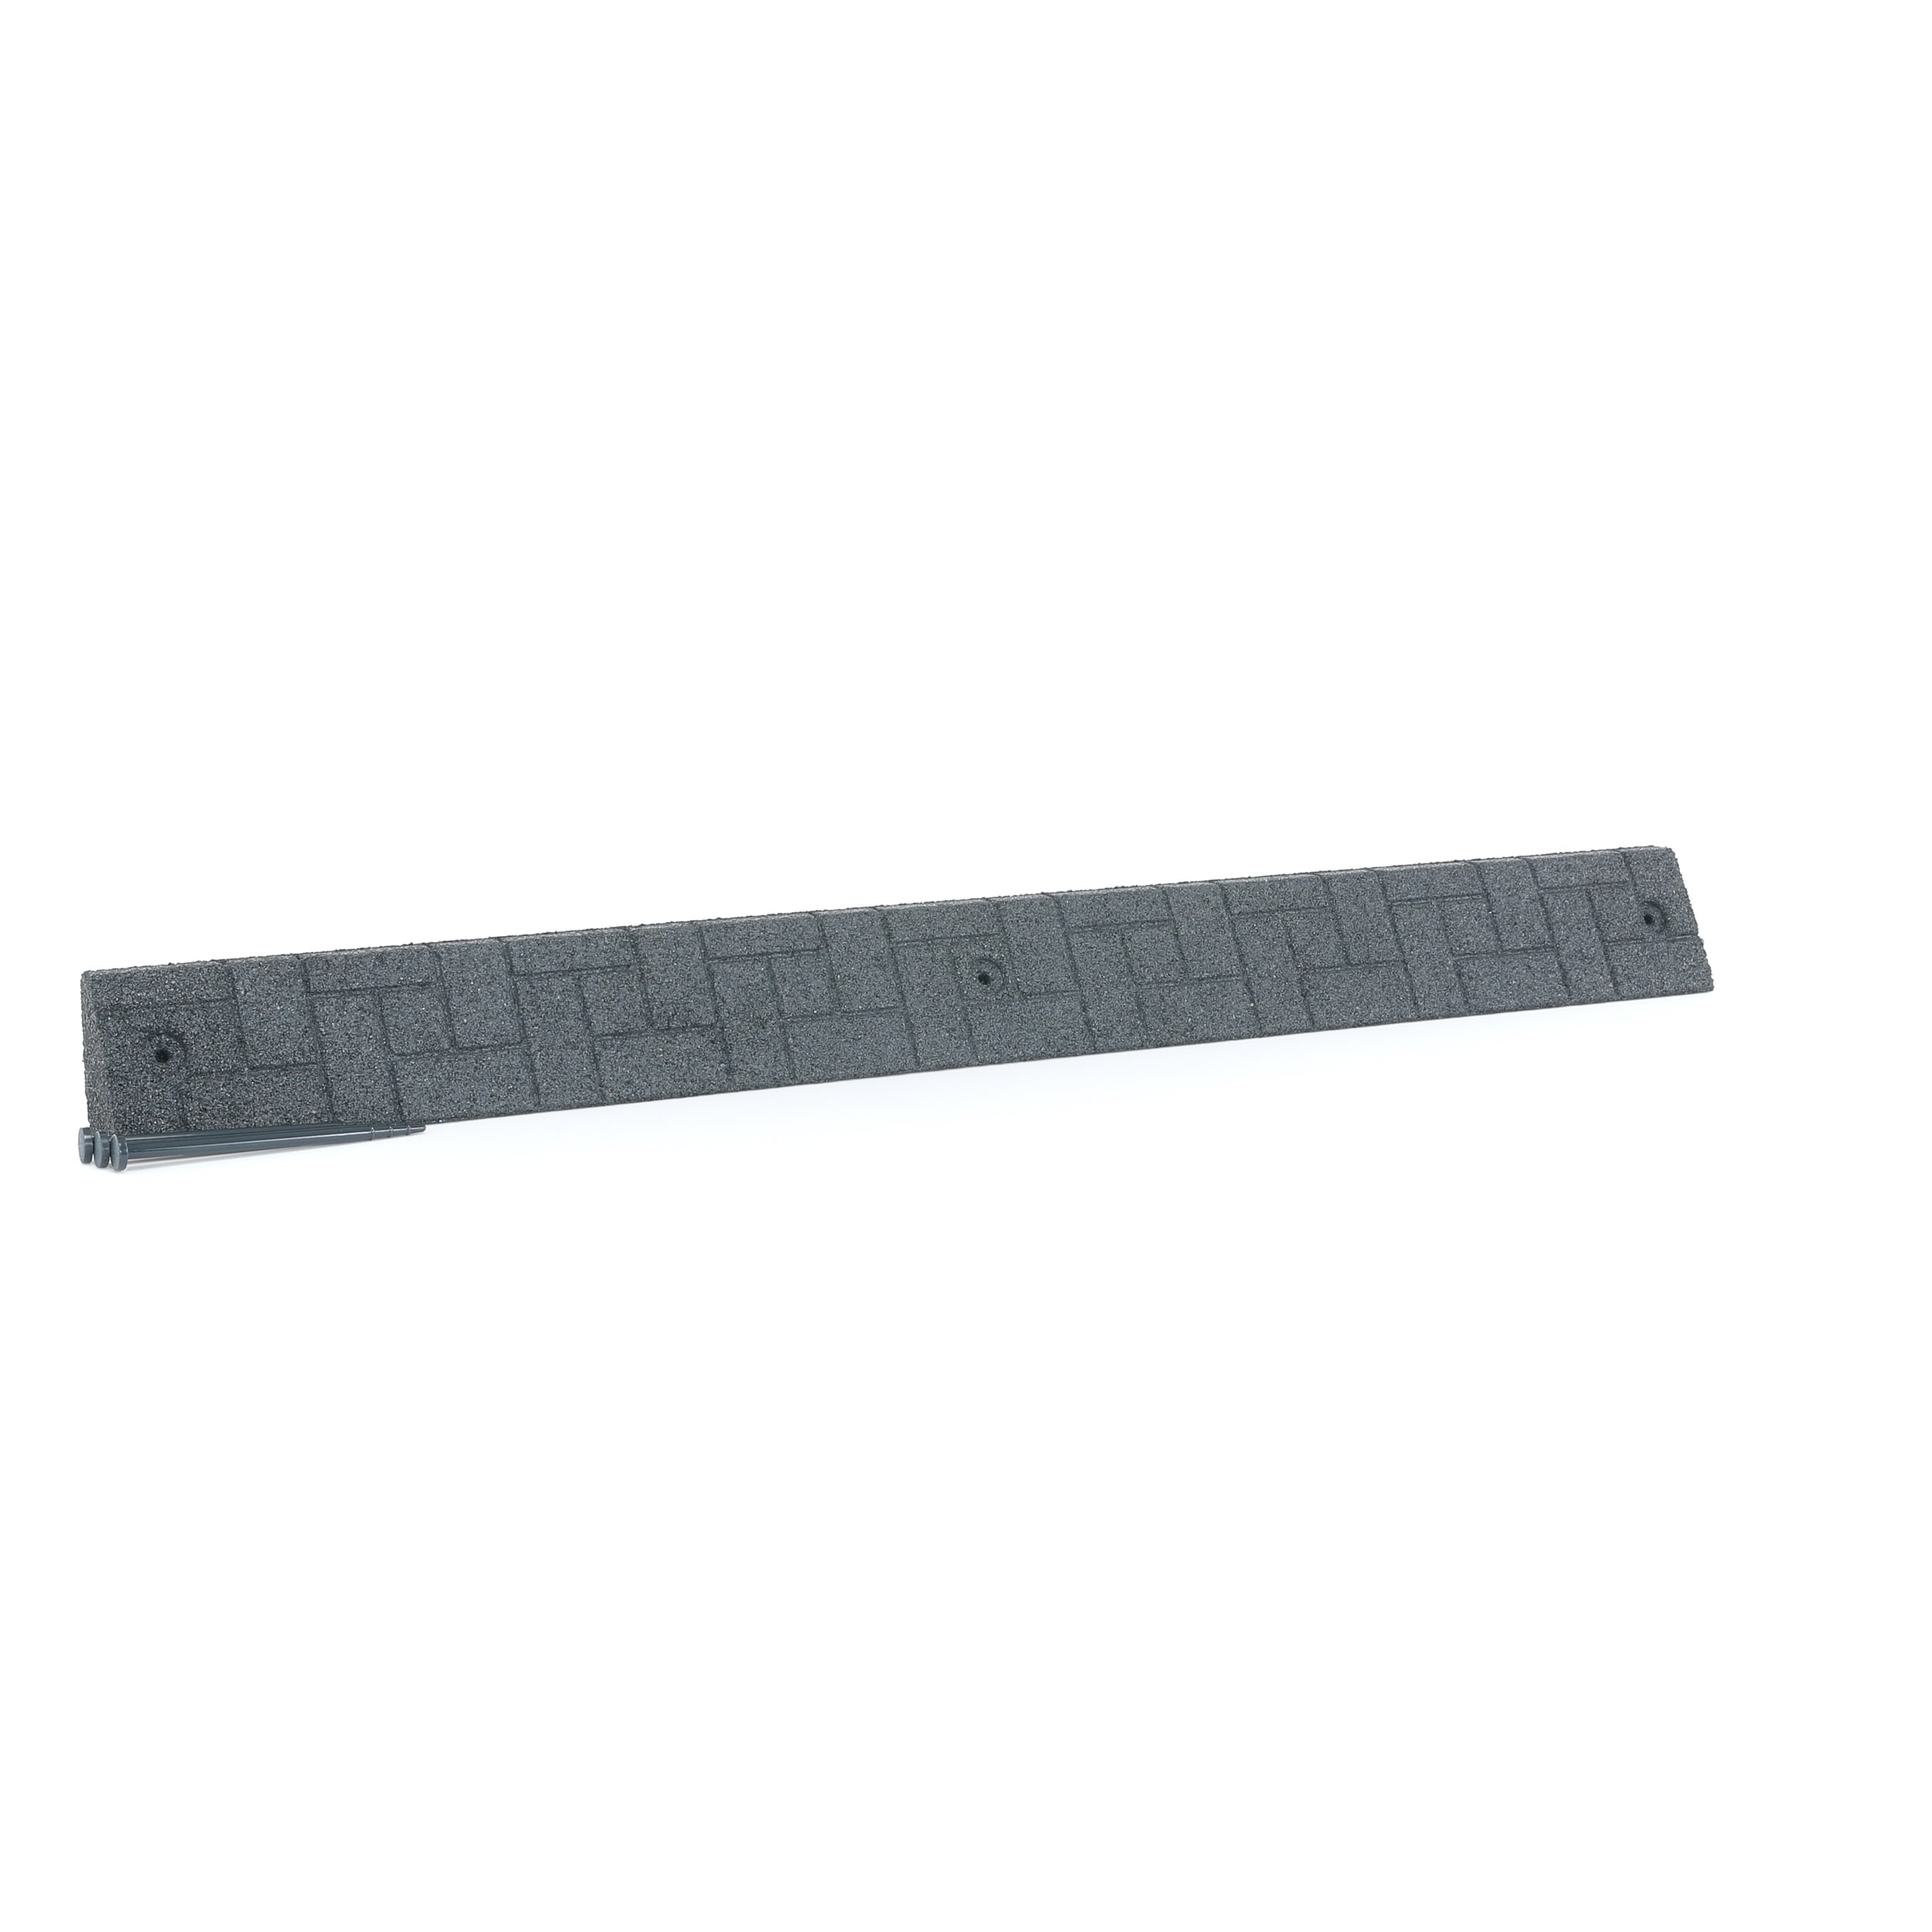 4-ft x 3-in Curb Gray Rubber Landscape Edging Section | - Rubberific RTCE4GY